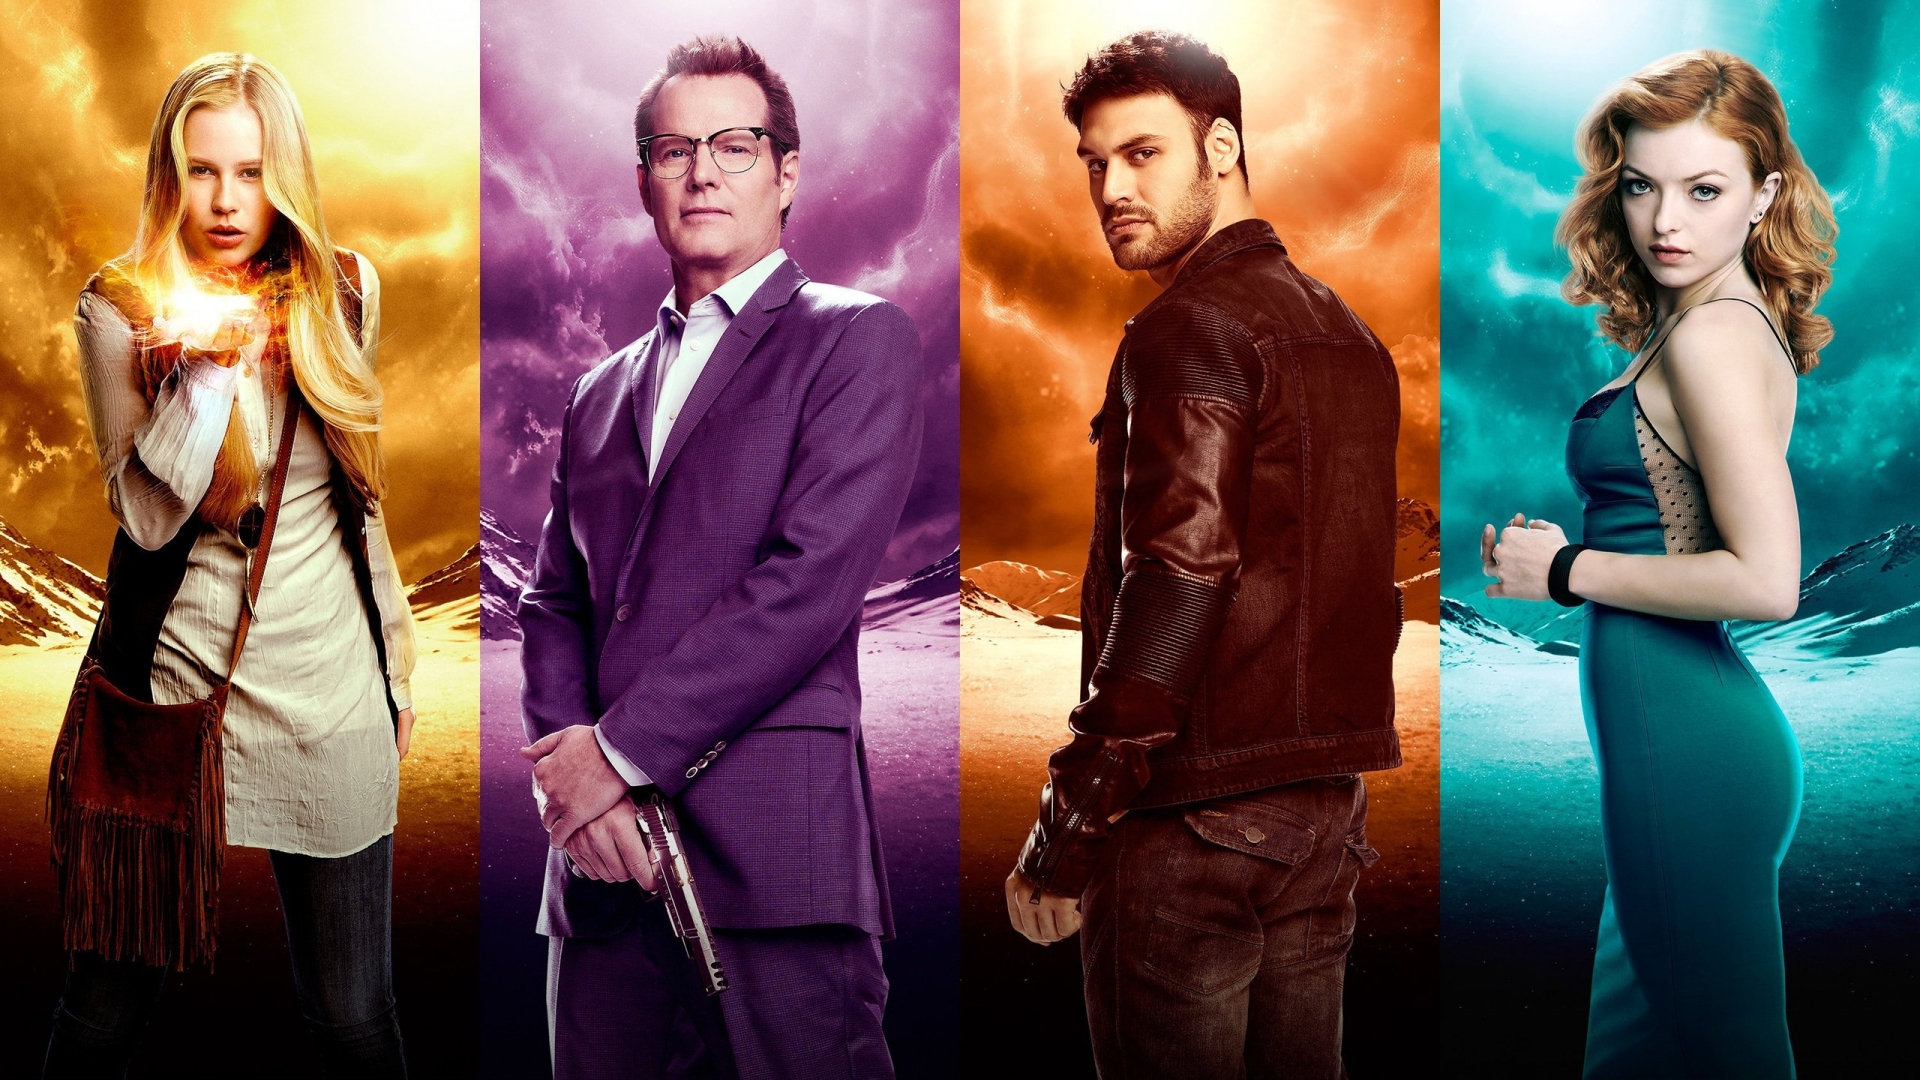 Heroes Reborn Cast for 1920 x 1080 HDTV 1080p resolution